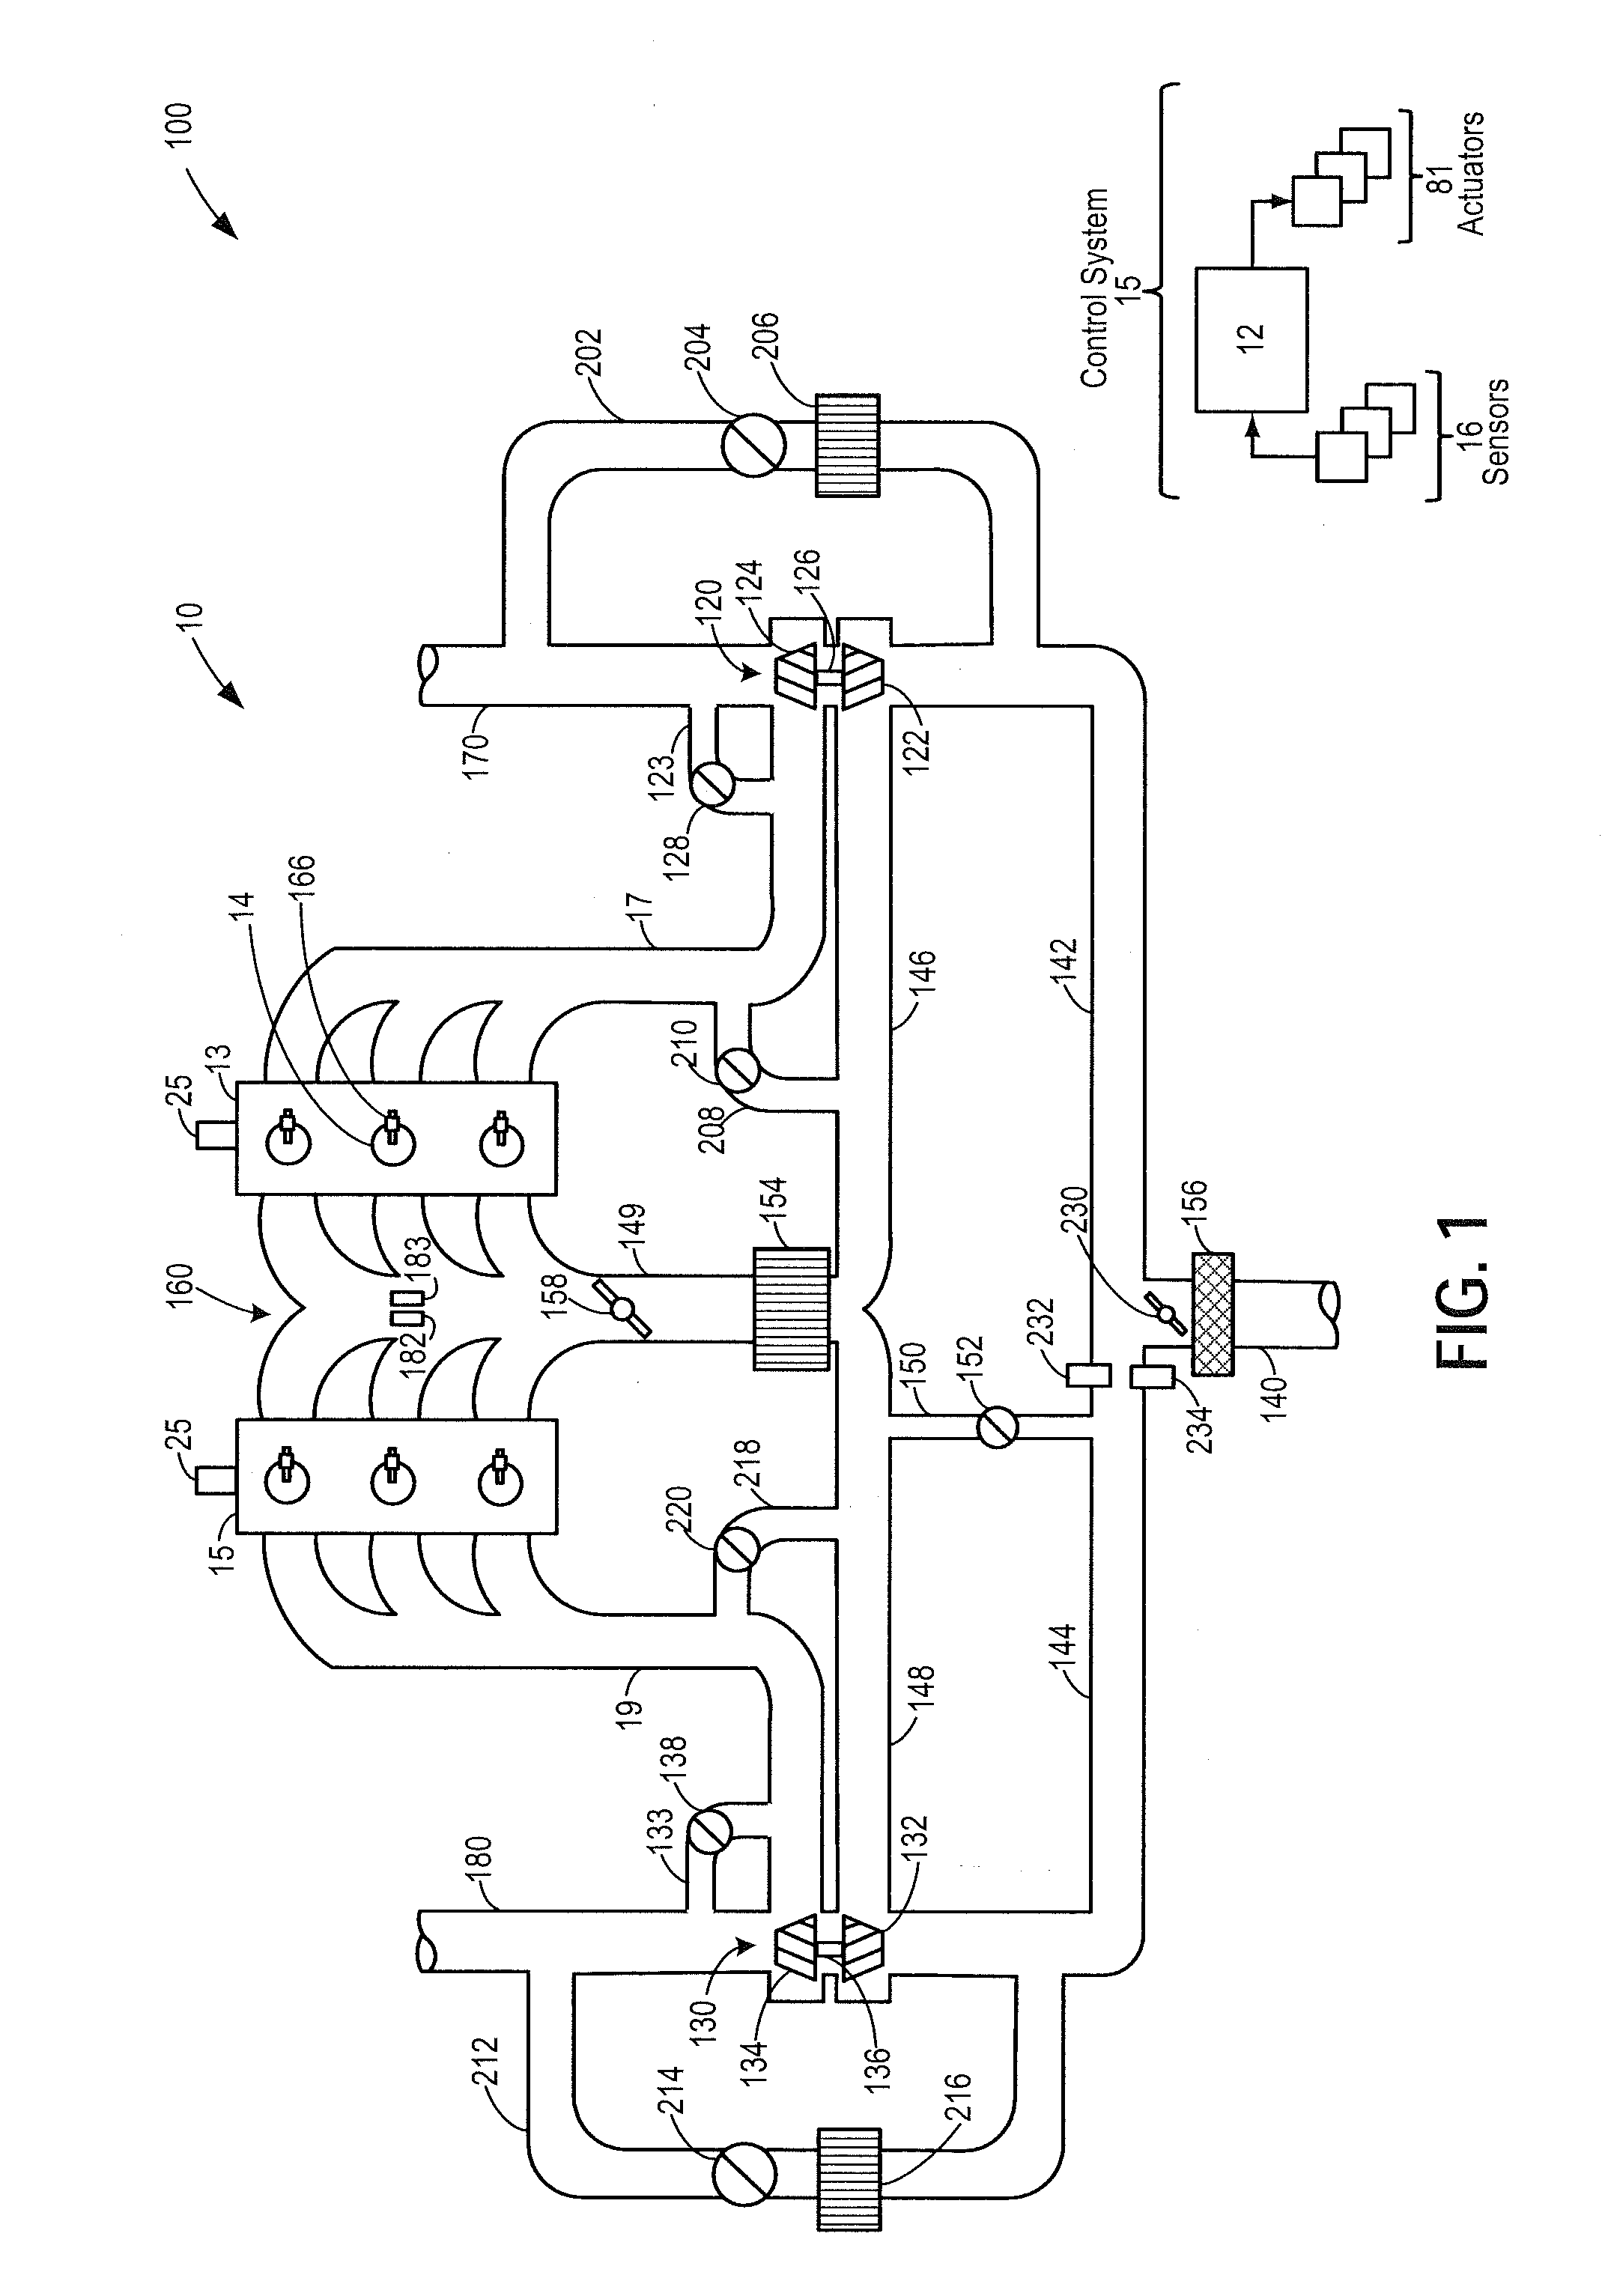 Method and system for an intake humidity sensor